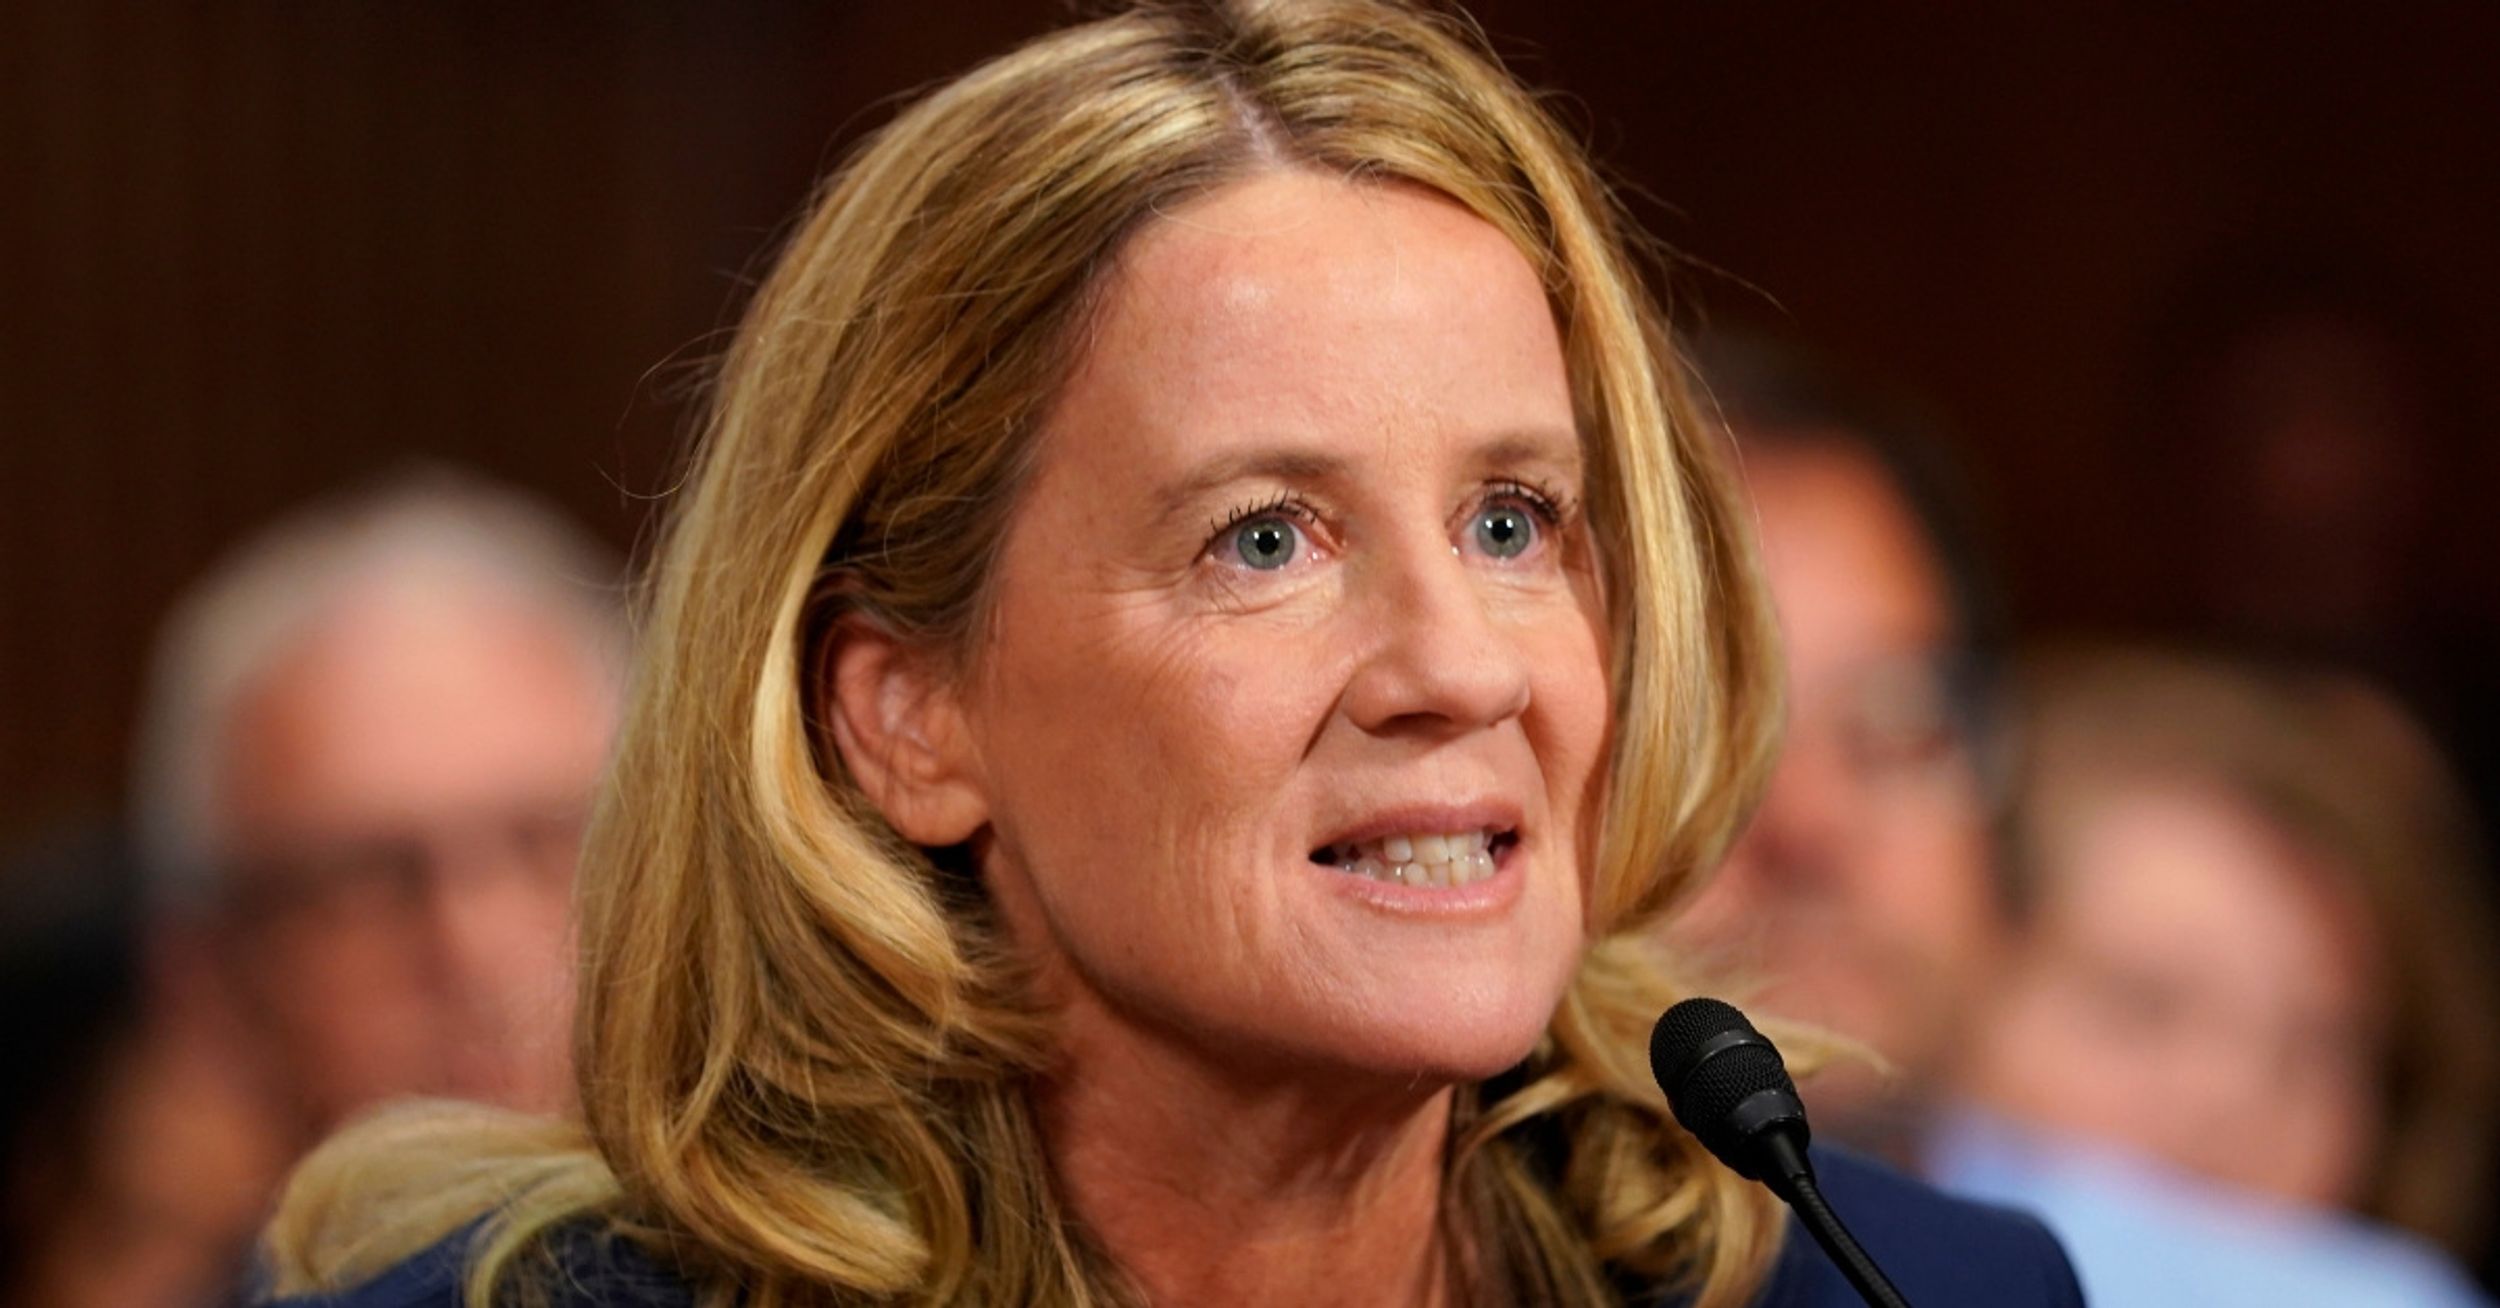 'Star Wars' Actress Mocks Christine Blasey Ford's Voice And Twitter Is Not Having It